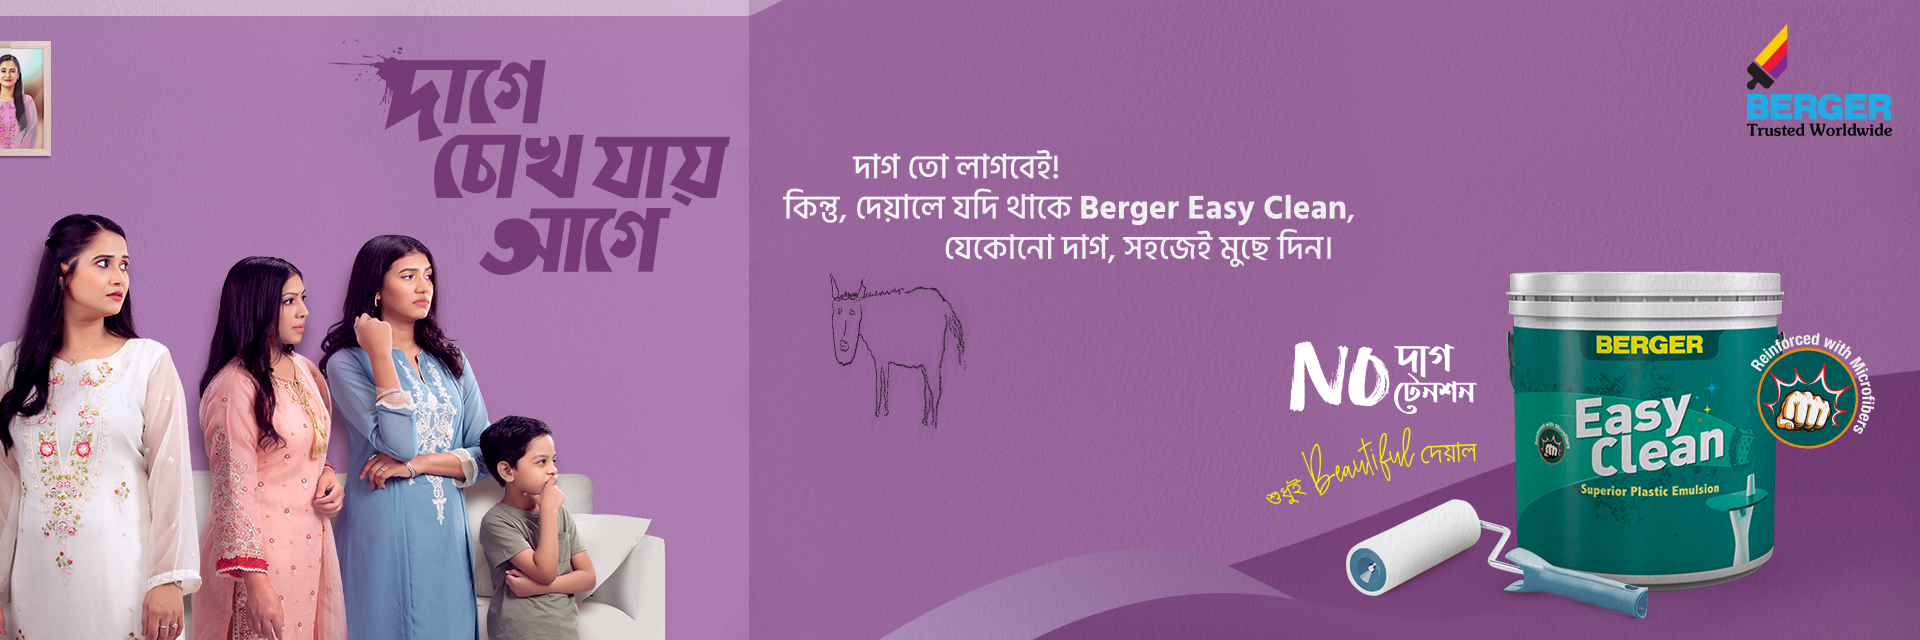 Berger Easy Clean- Daag e Chokh Jaay Aage